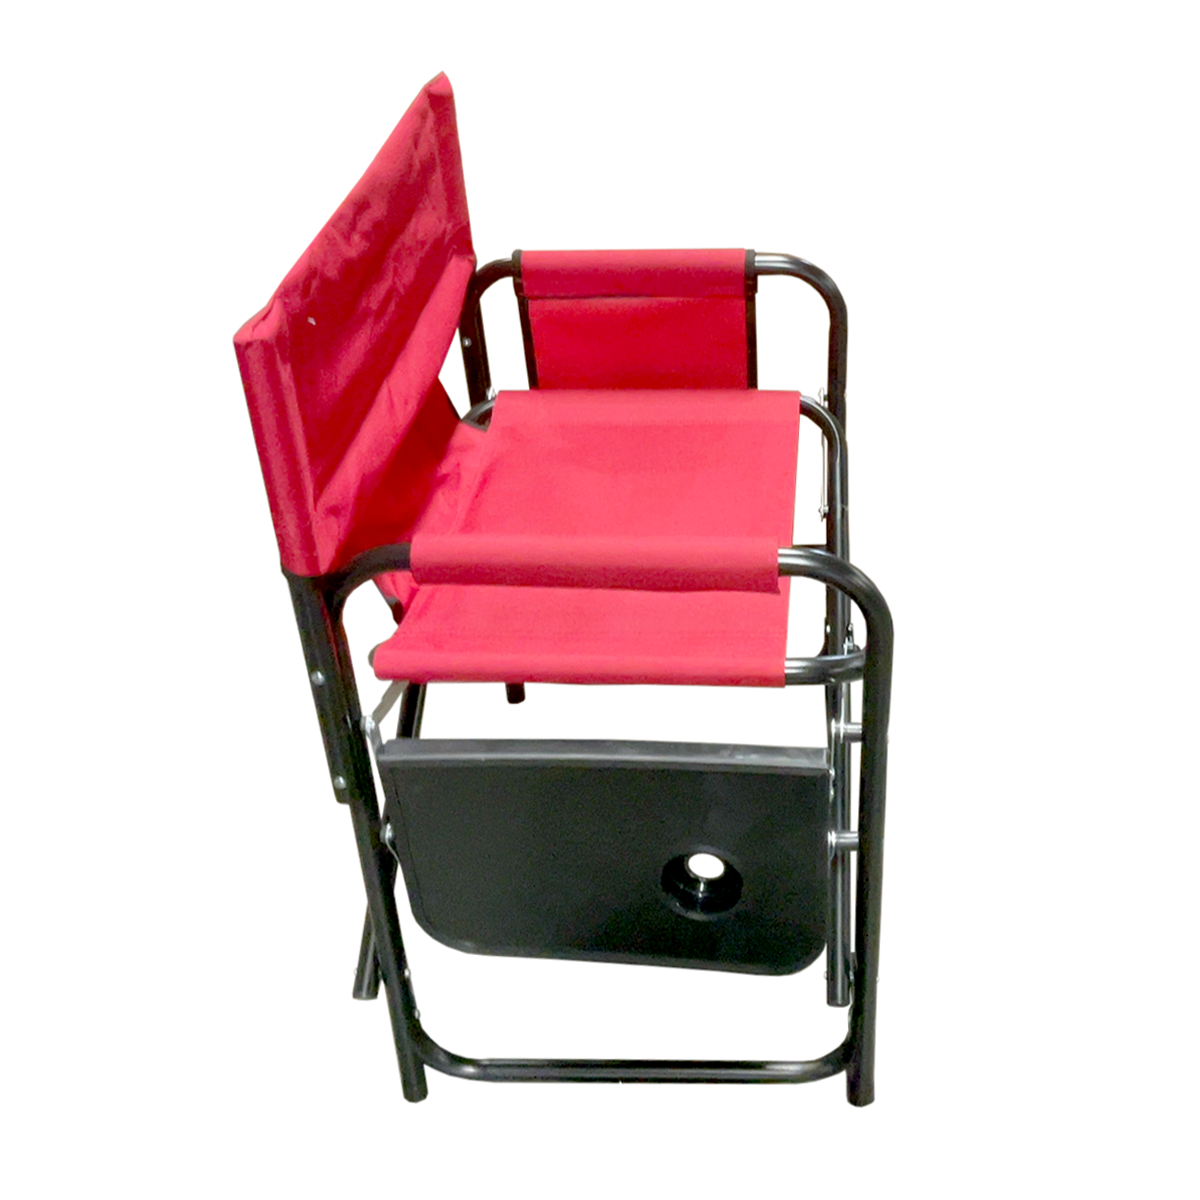 Trappers Peak Folding Directors Chair Outdoor Camping Chair with Side Table & Pockets, Red or Blue